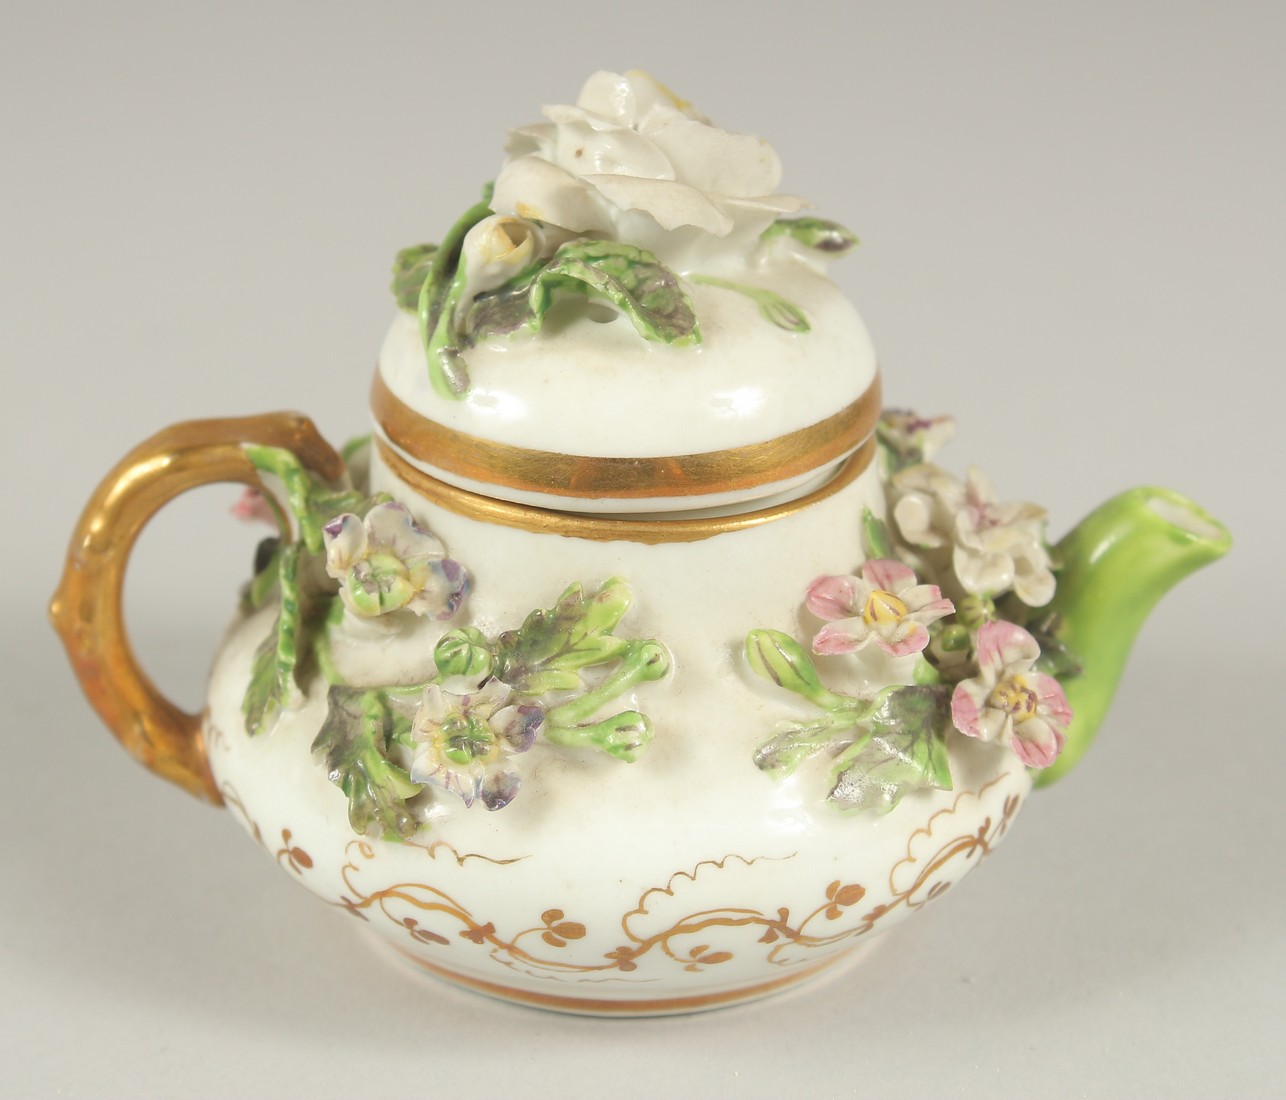 A GOOD SMALL ROCKINGHAM TEAPOT encrusted with flowers. Rockingham mark in puce. 3.5ins diameter.